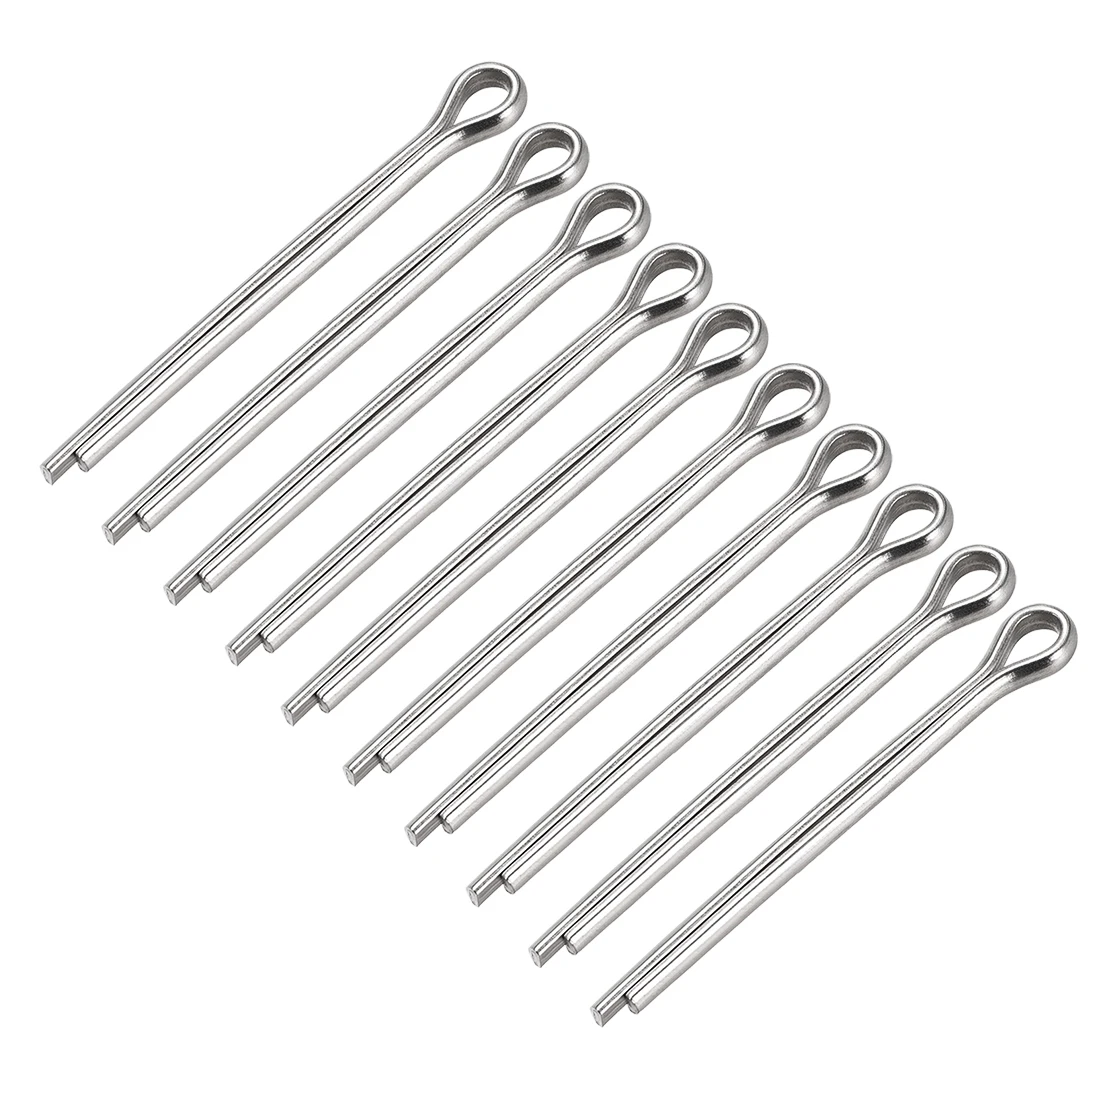 Select your size 1.6mm/2mm/3mm/4mm Stainless Steel Split Cotter Pins 